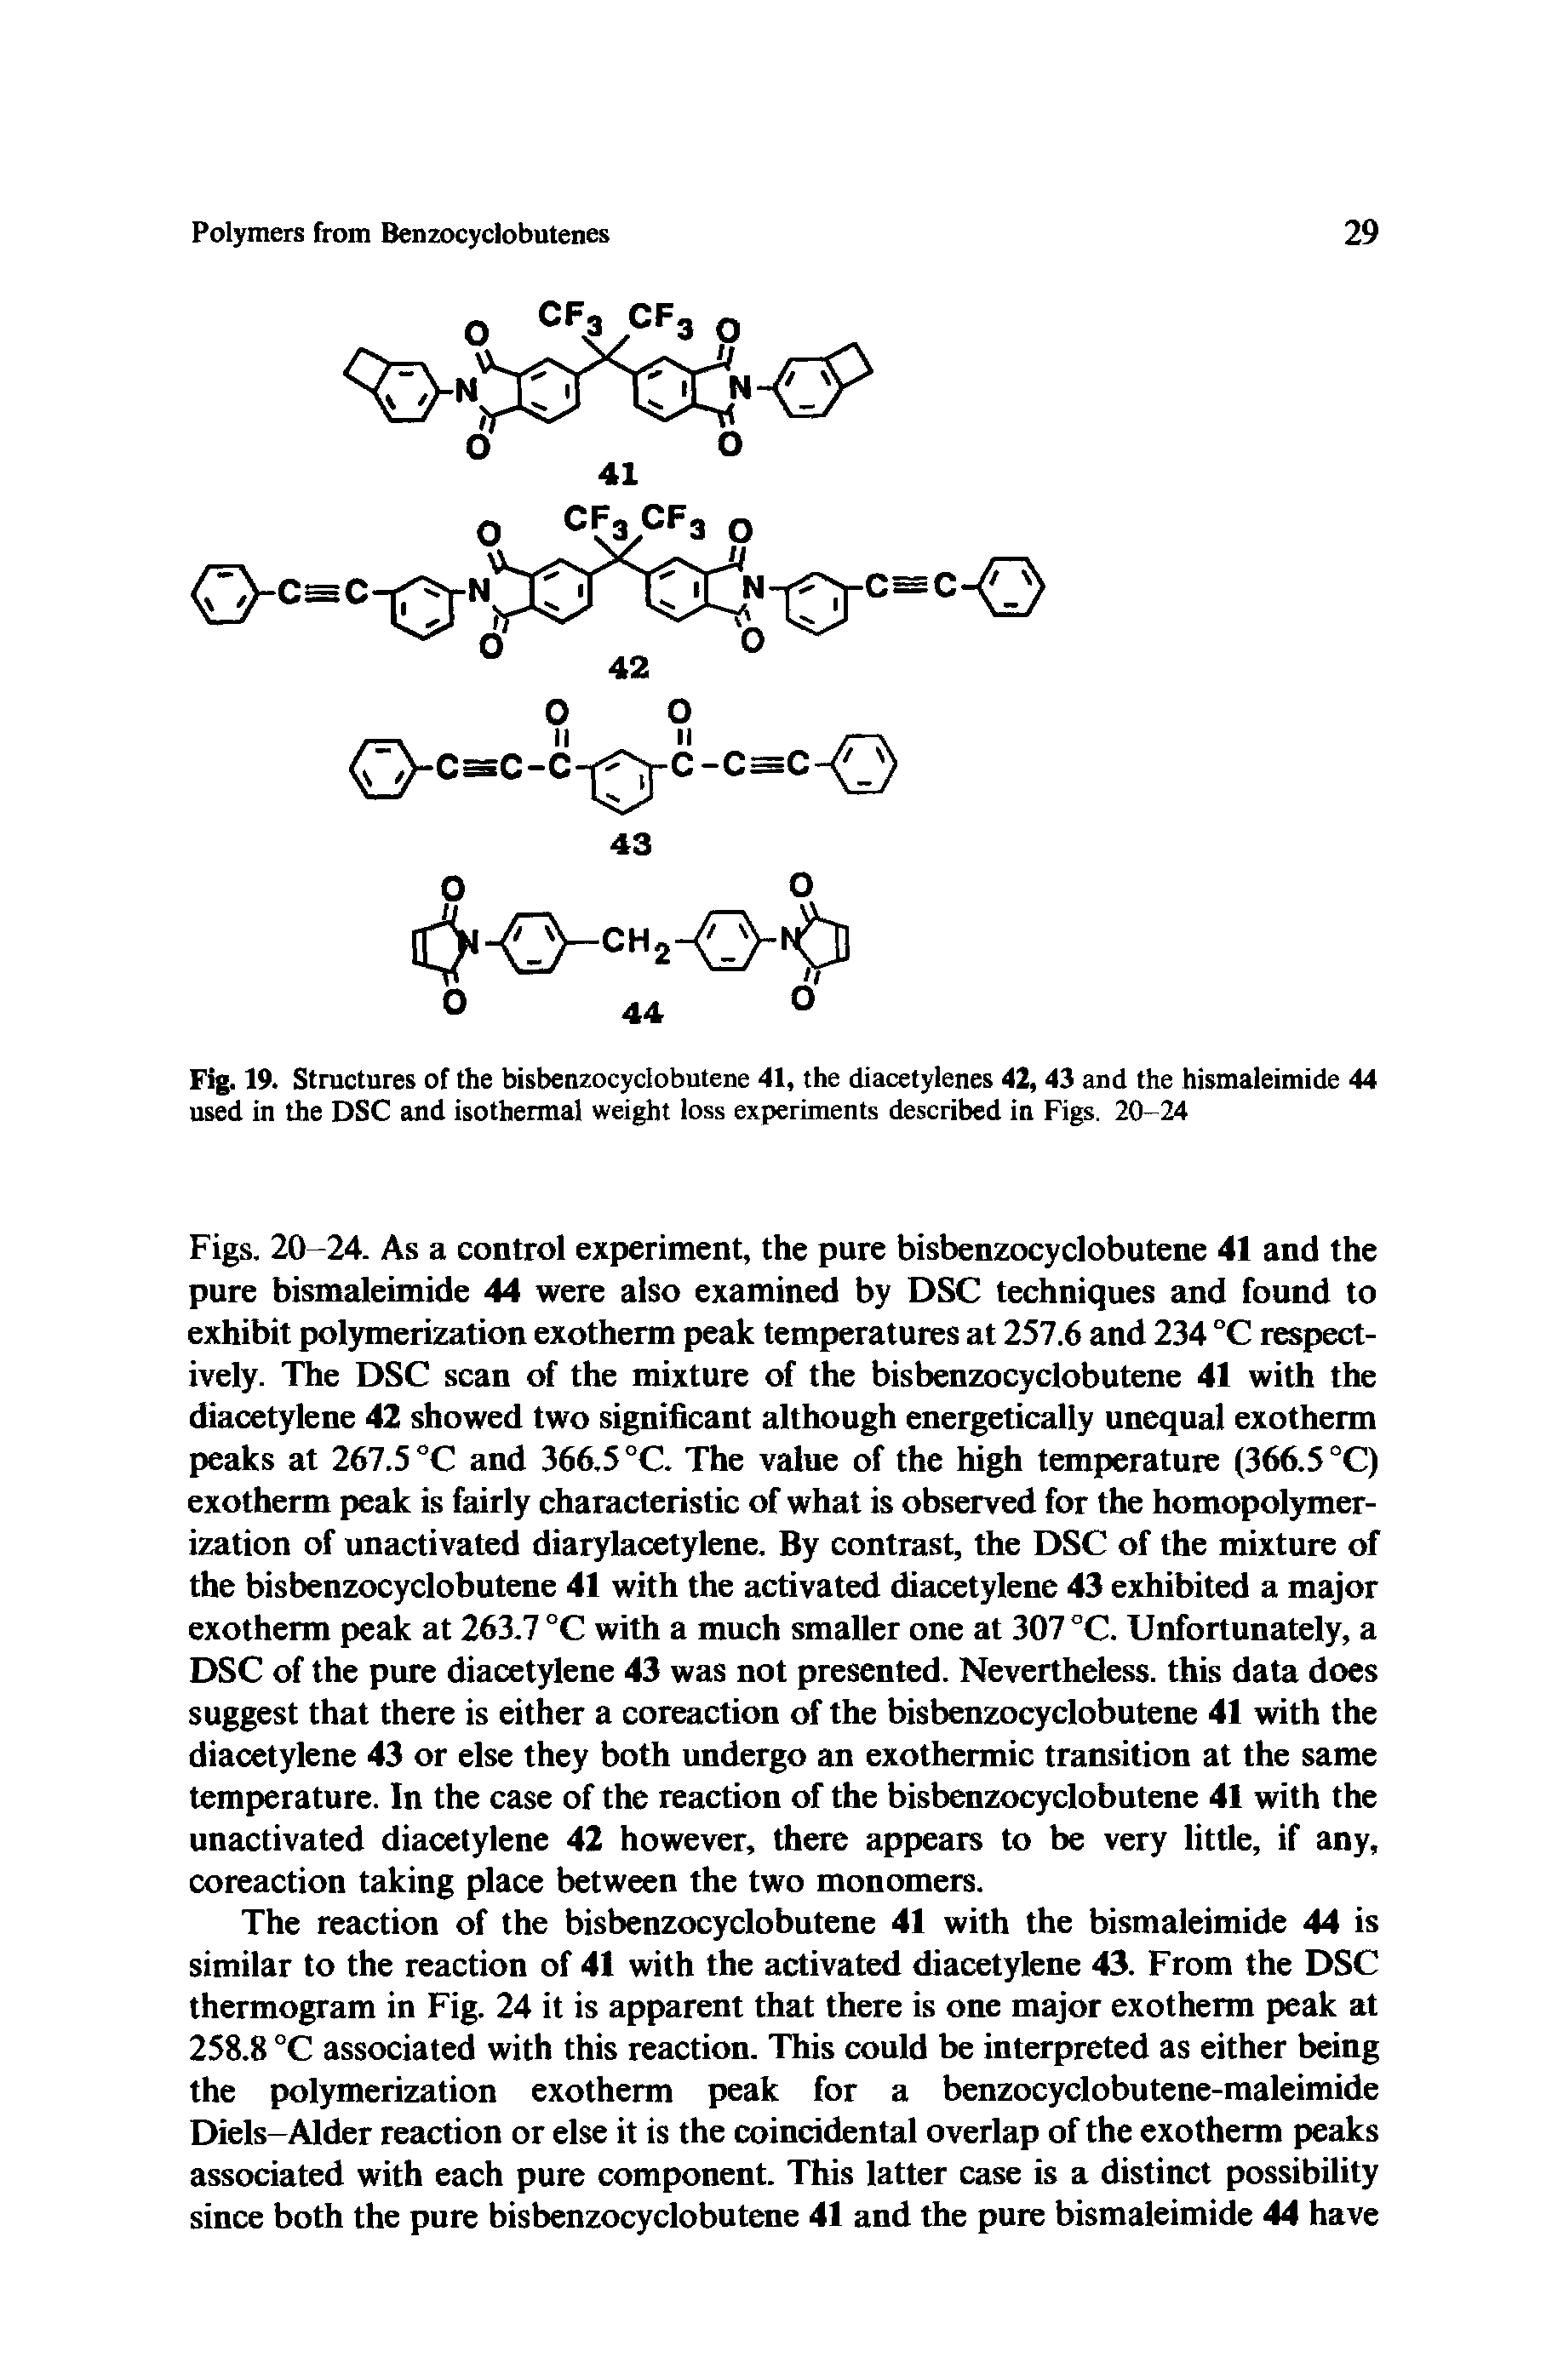 Fig. 19. Structures of the bisbenzocyclobutene 41, the diacetylenes 42, 43 and the hismaleimide 44 used in the DSC and isothermal weight loss experiments described in Figs. 20-24...